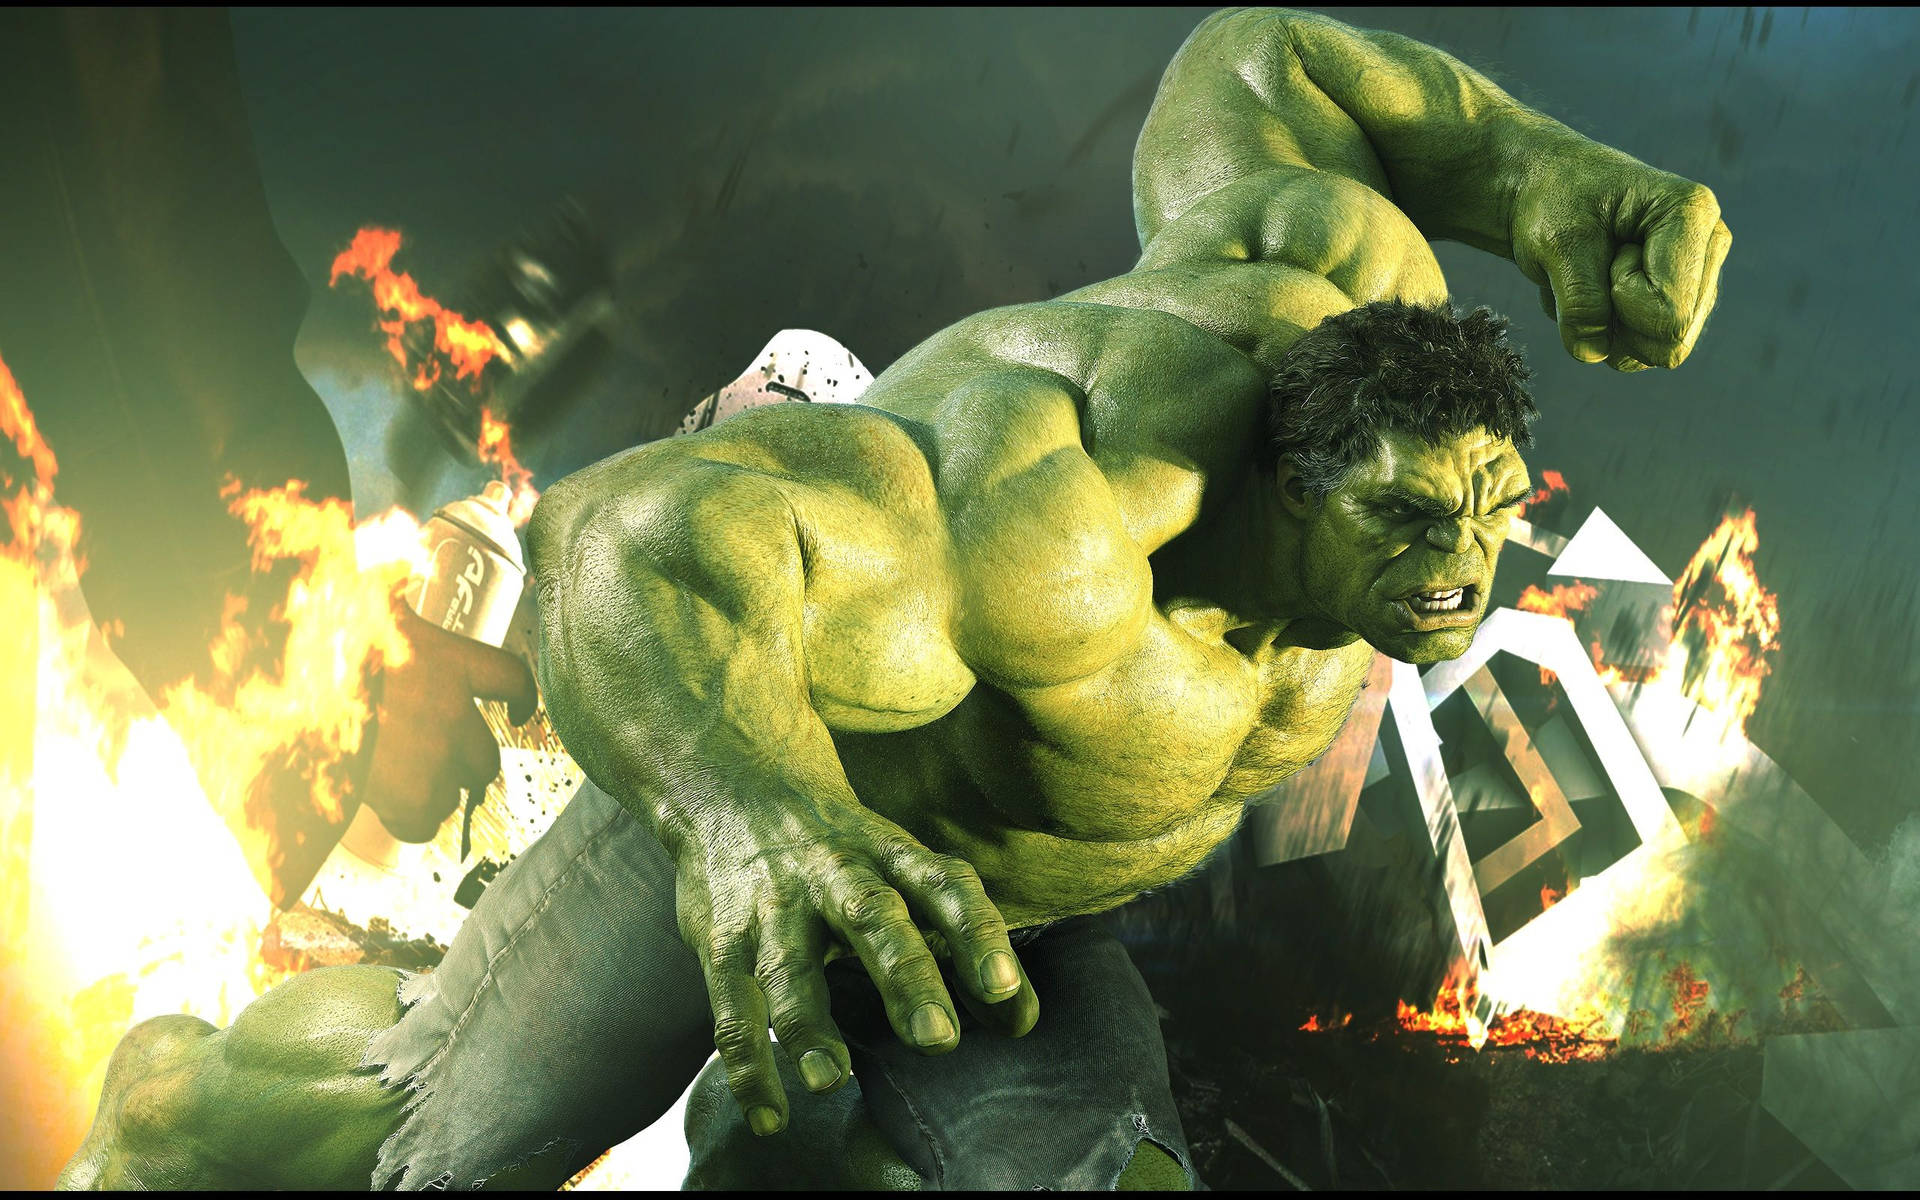 Fighting Hulk In Chaotic Background Wallpaper